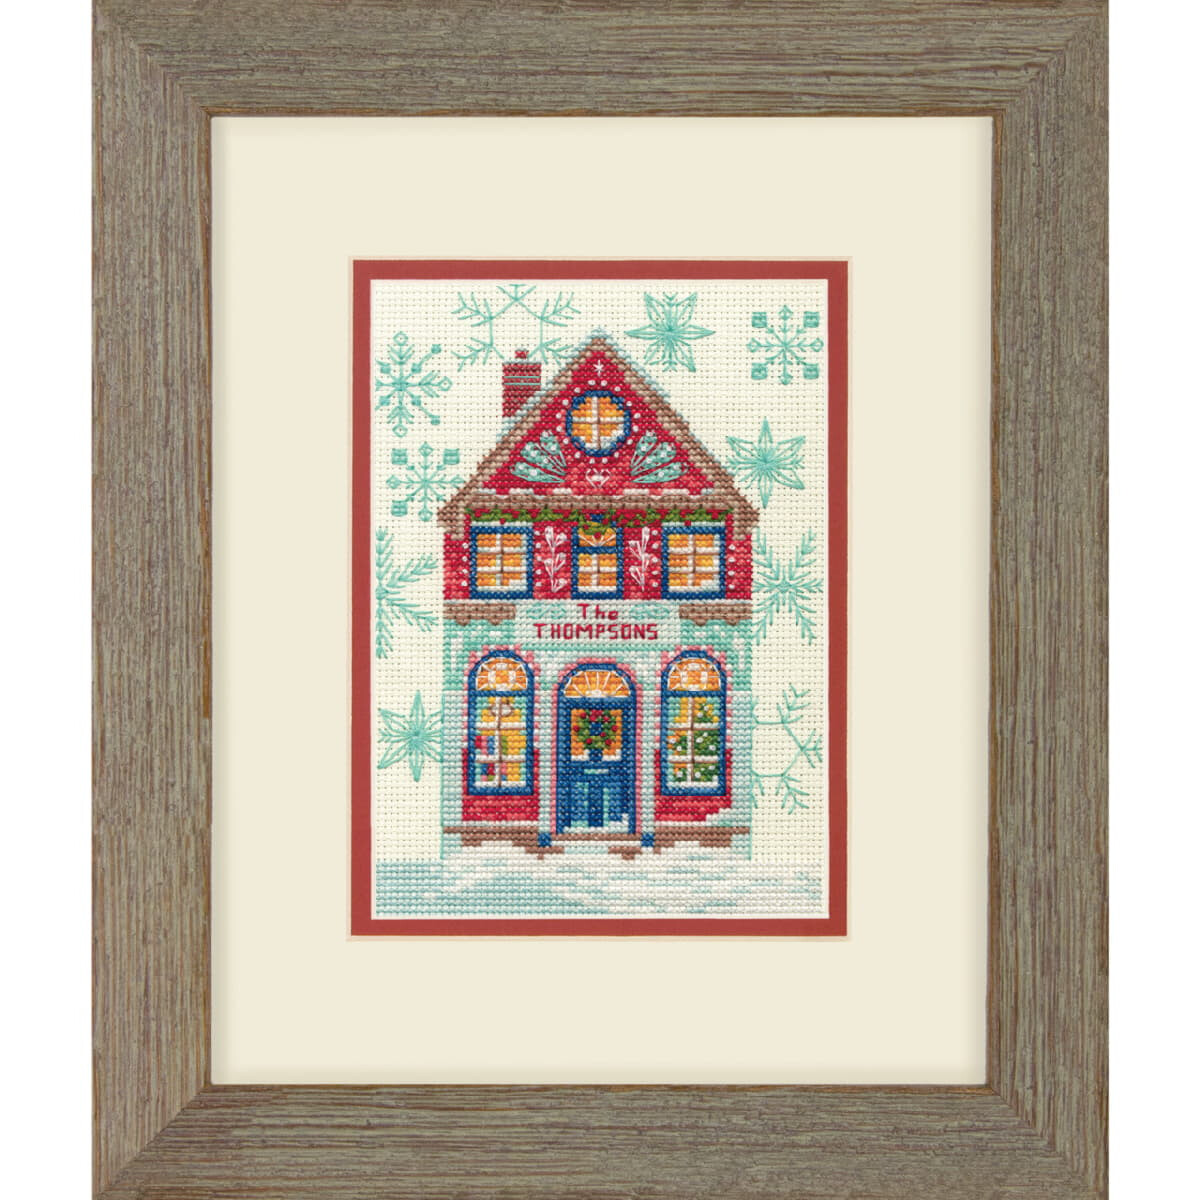 Dimensions counted cross stitch kit "Holiday...